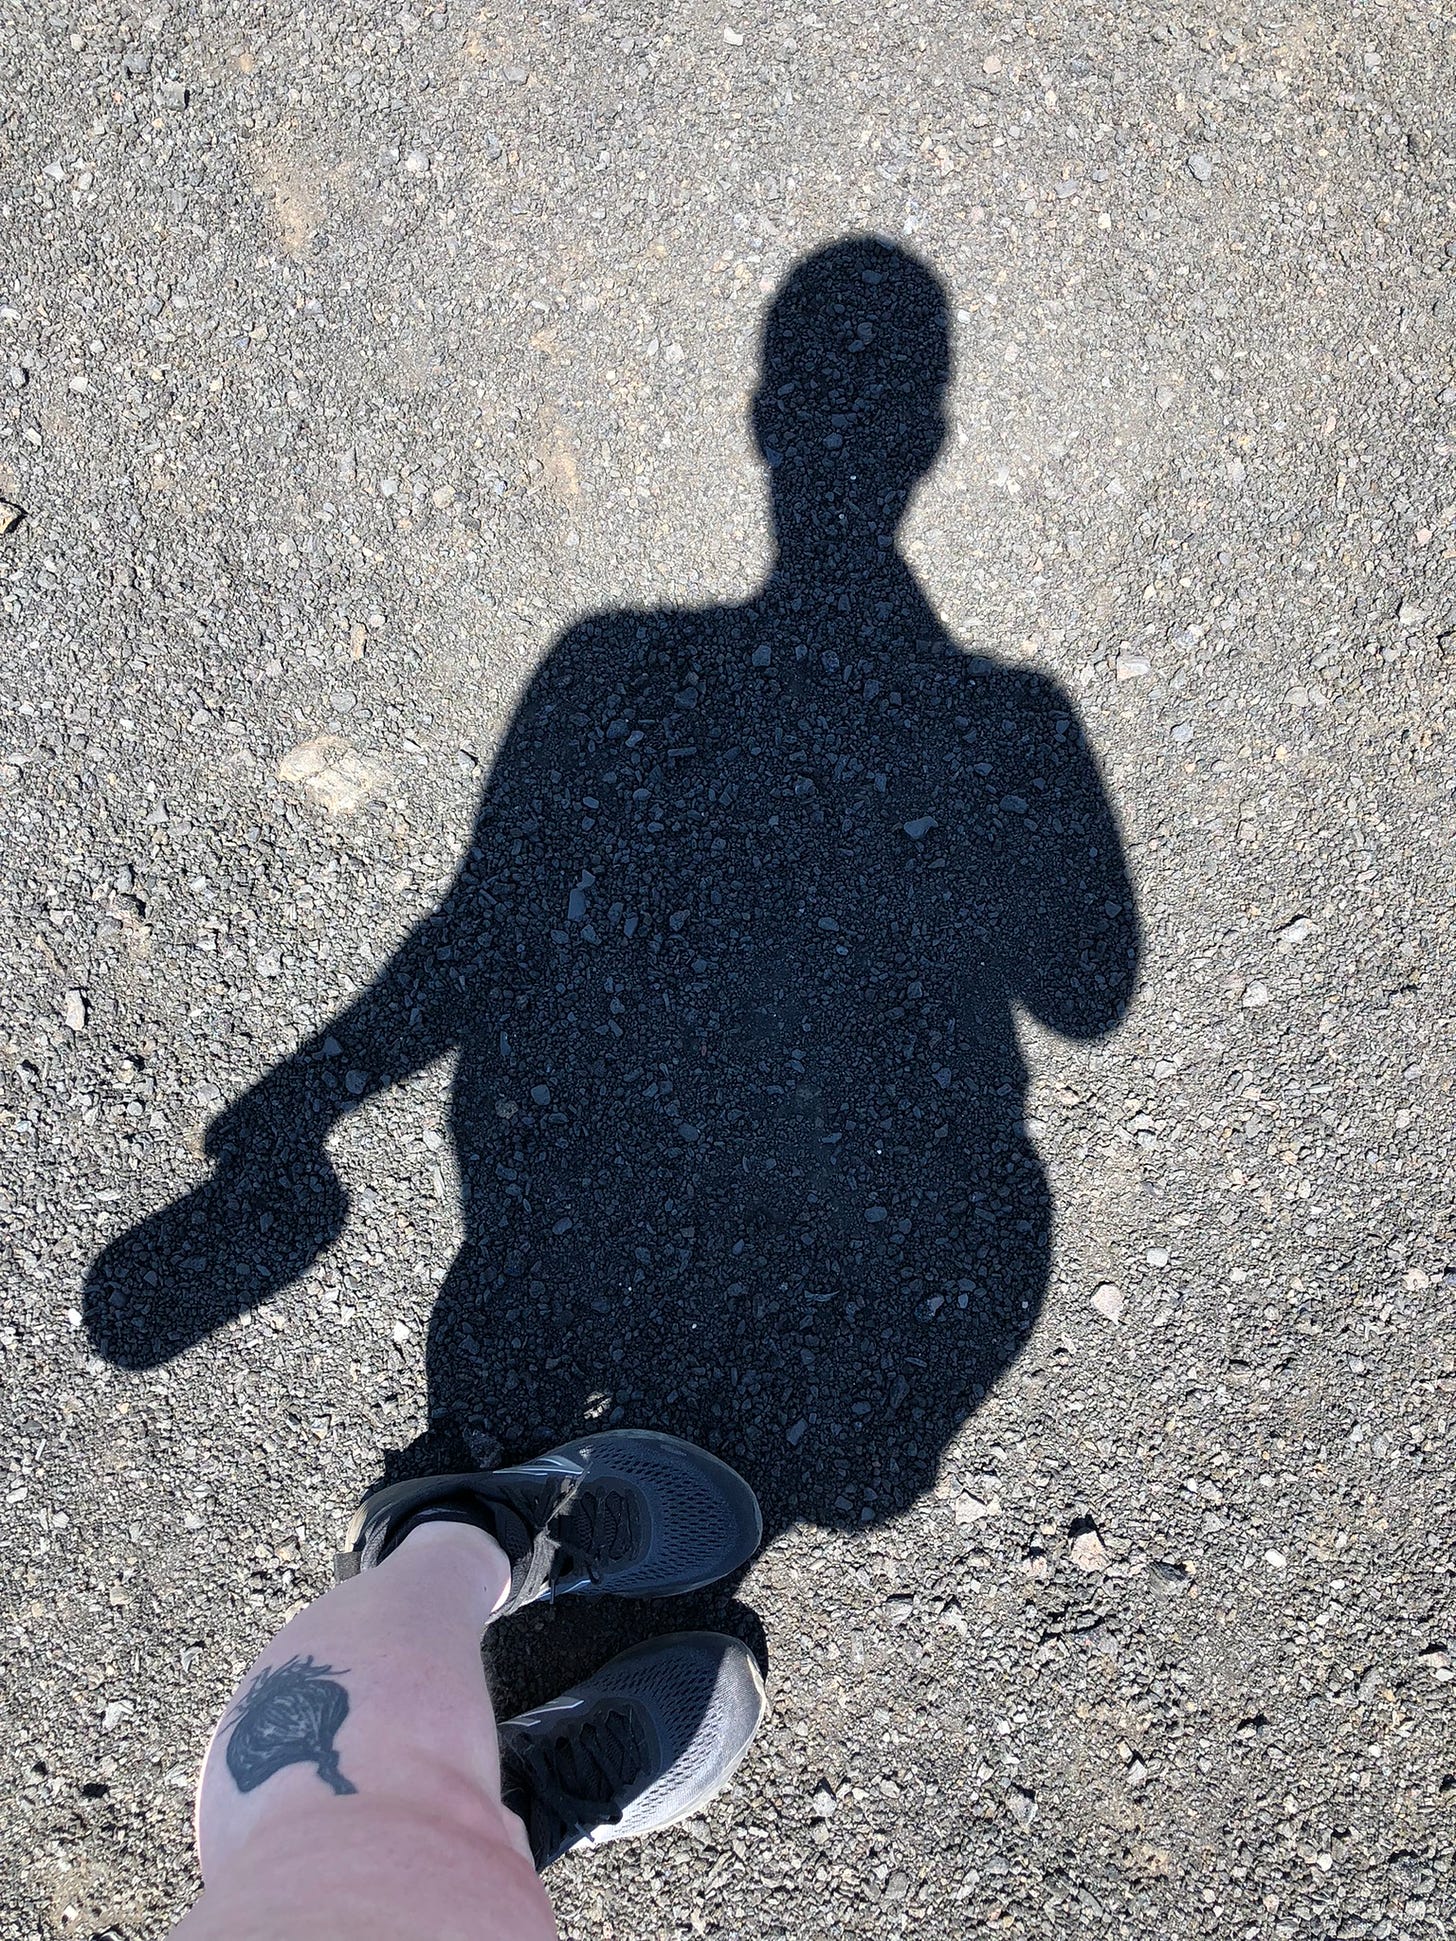 the shadow of a person cast on asphalt with one visible tattooed leg